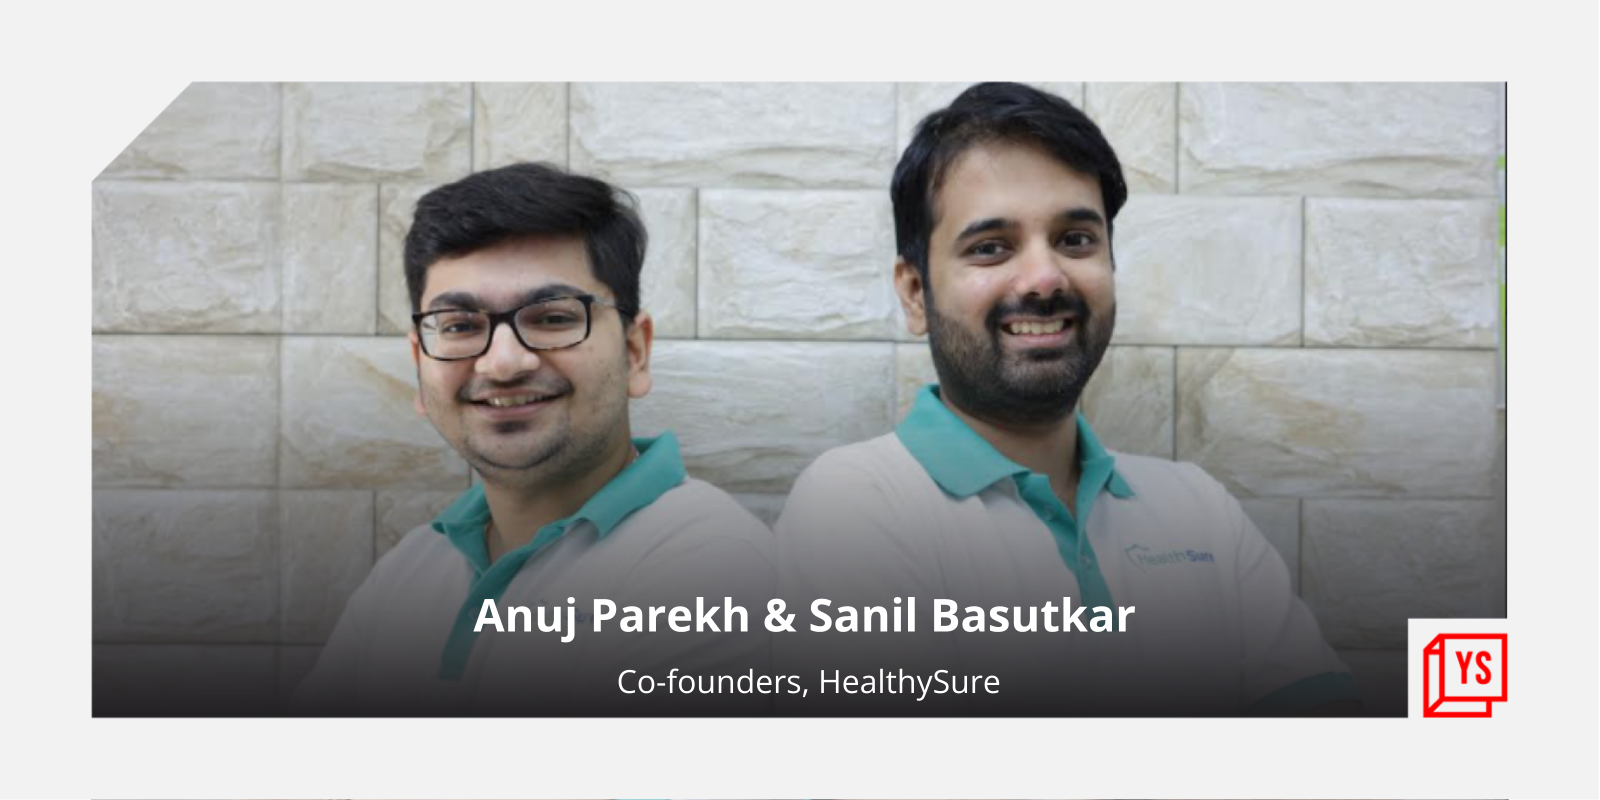 This insurtech startup is simplifying health insurance for employees, making it affordable and accessible